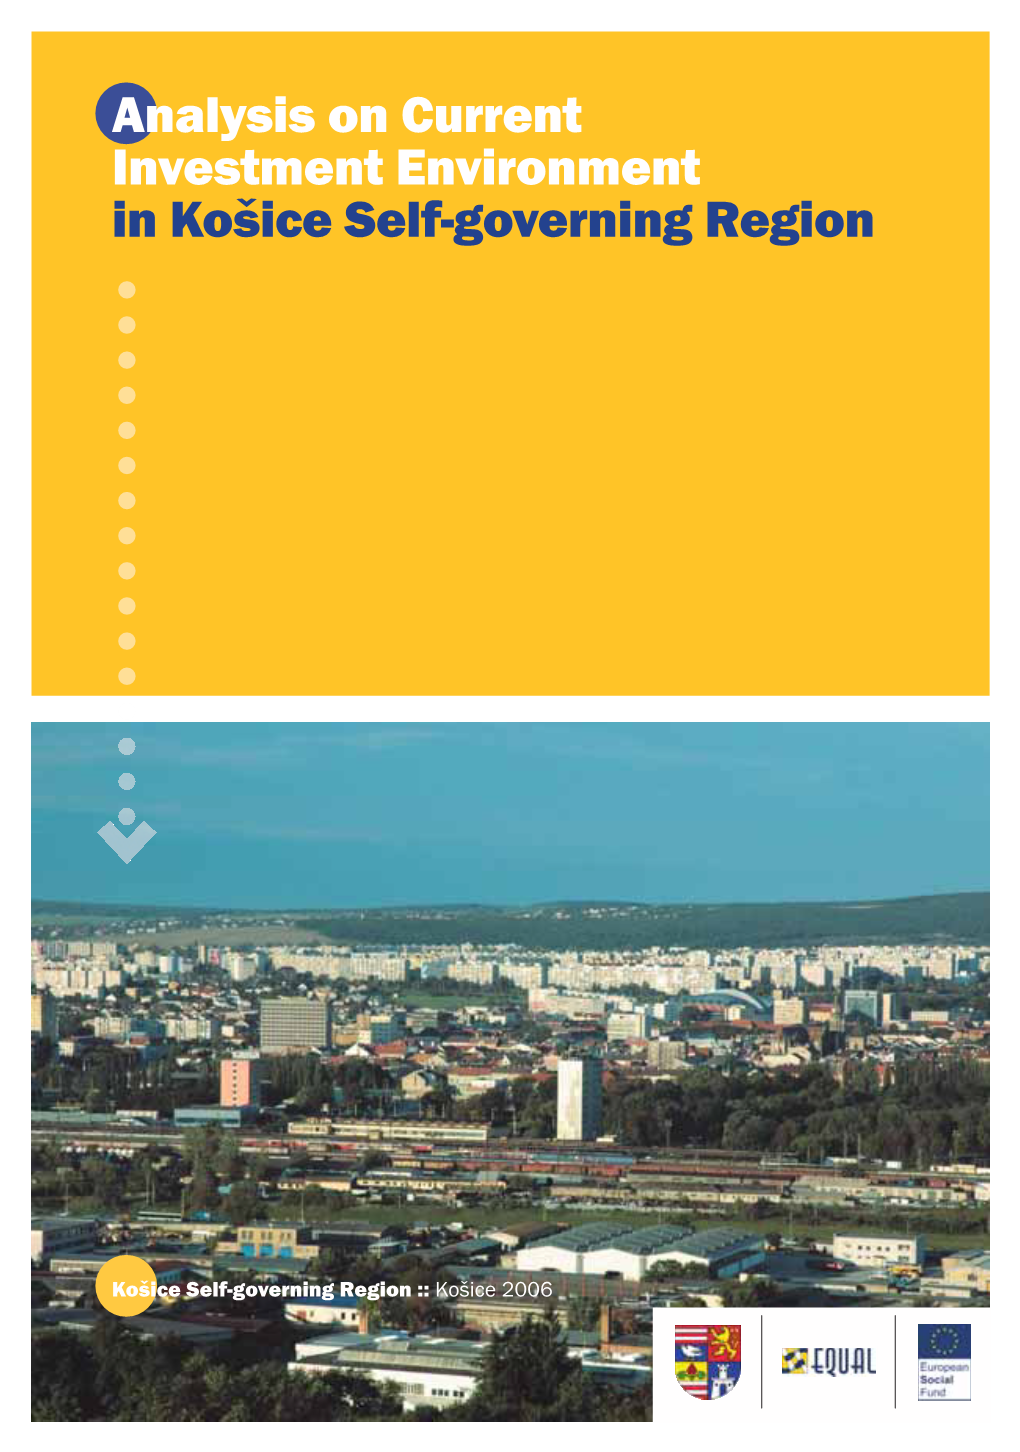 Analysis on Current Investment Environment in Košice Self-Governing Region